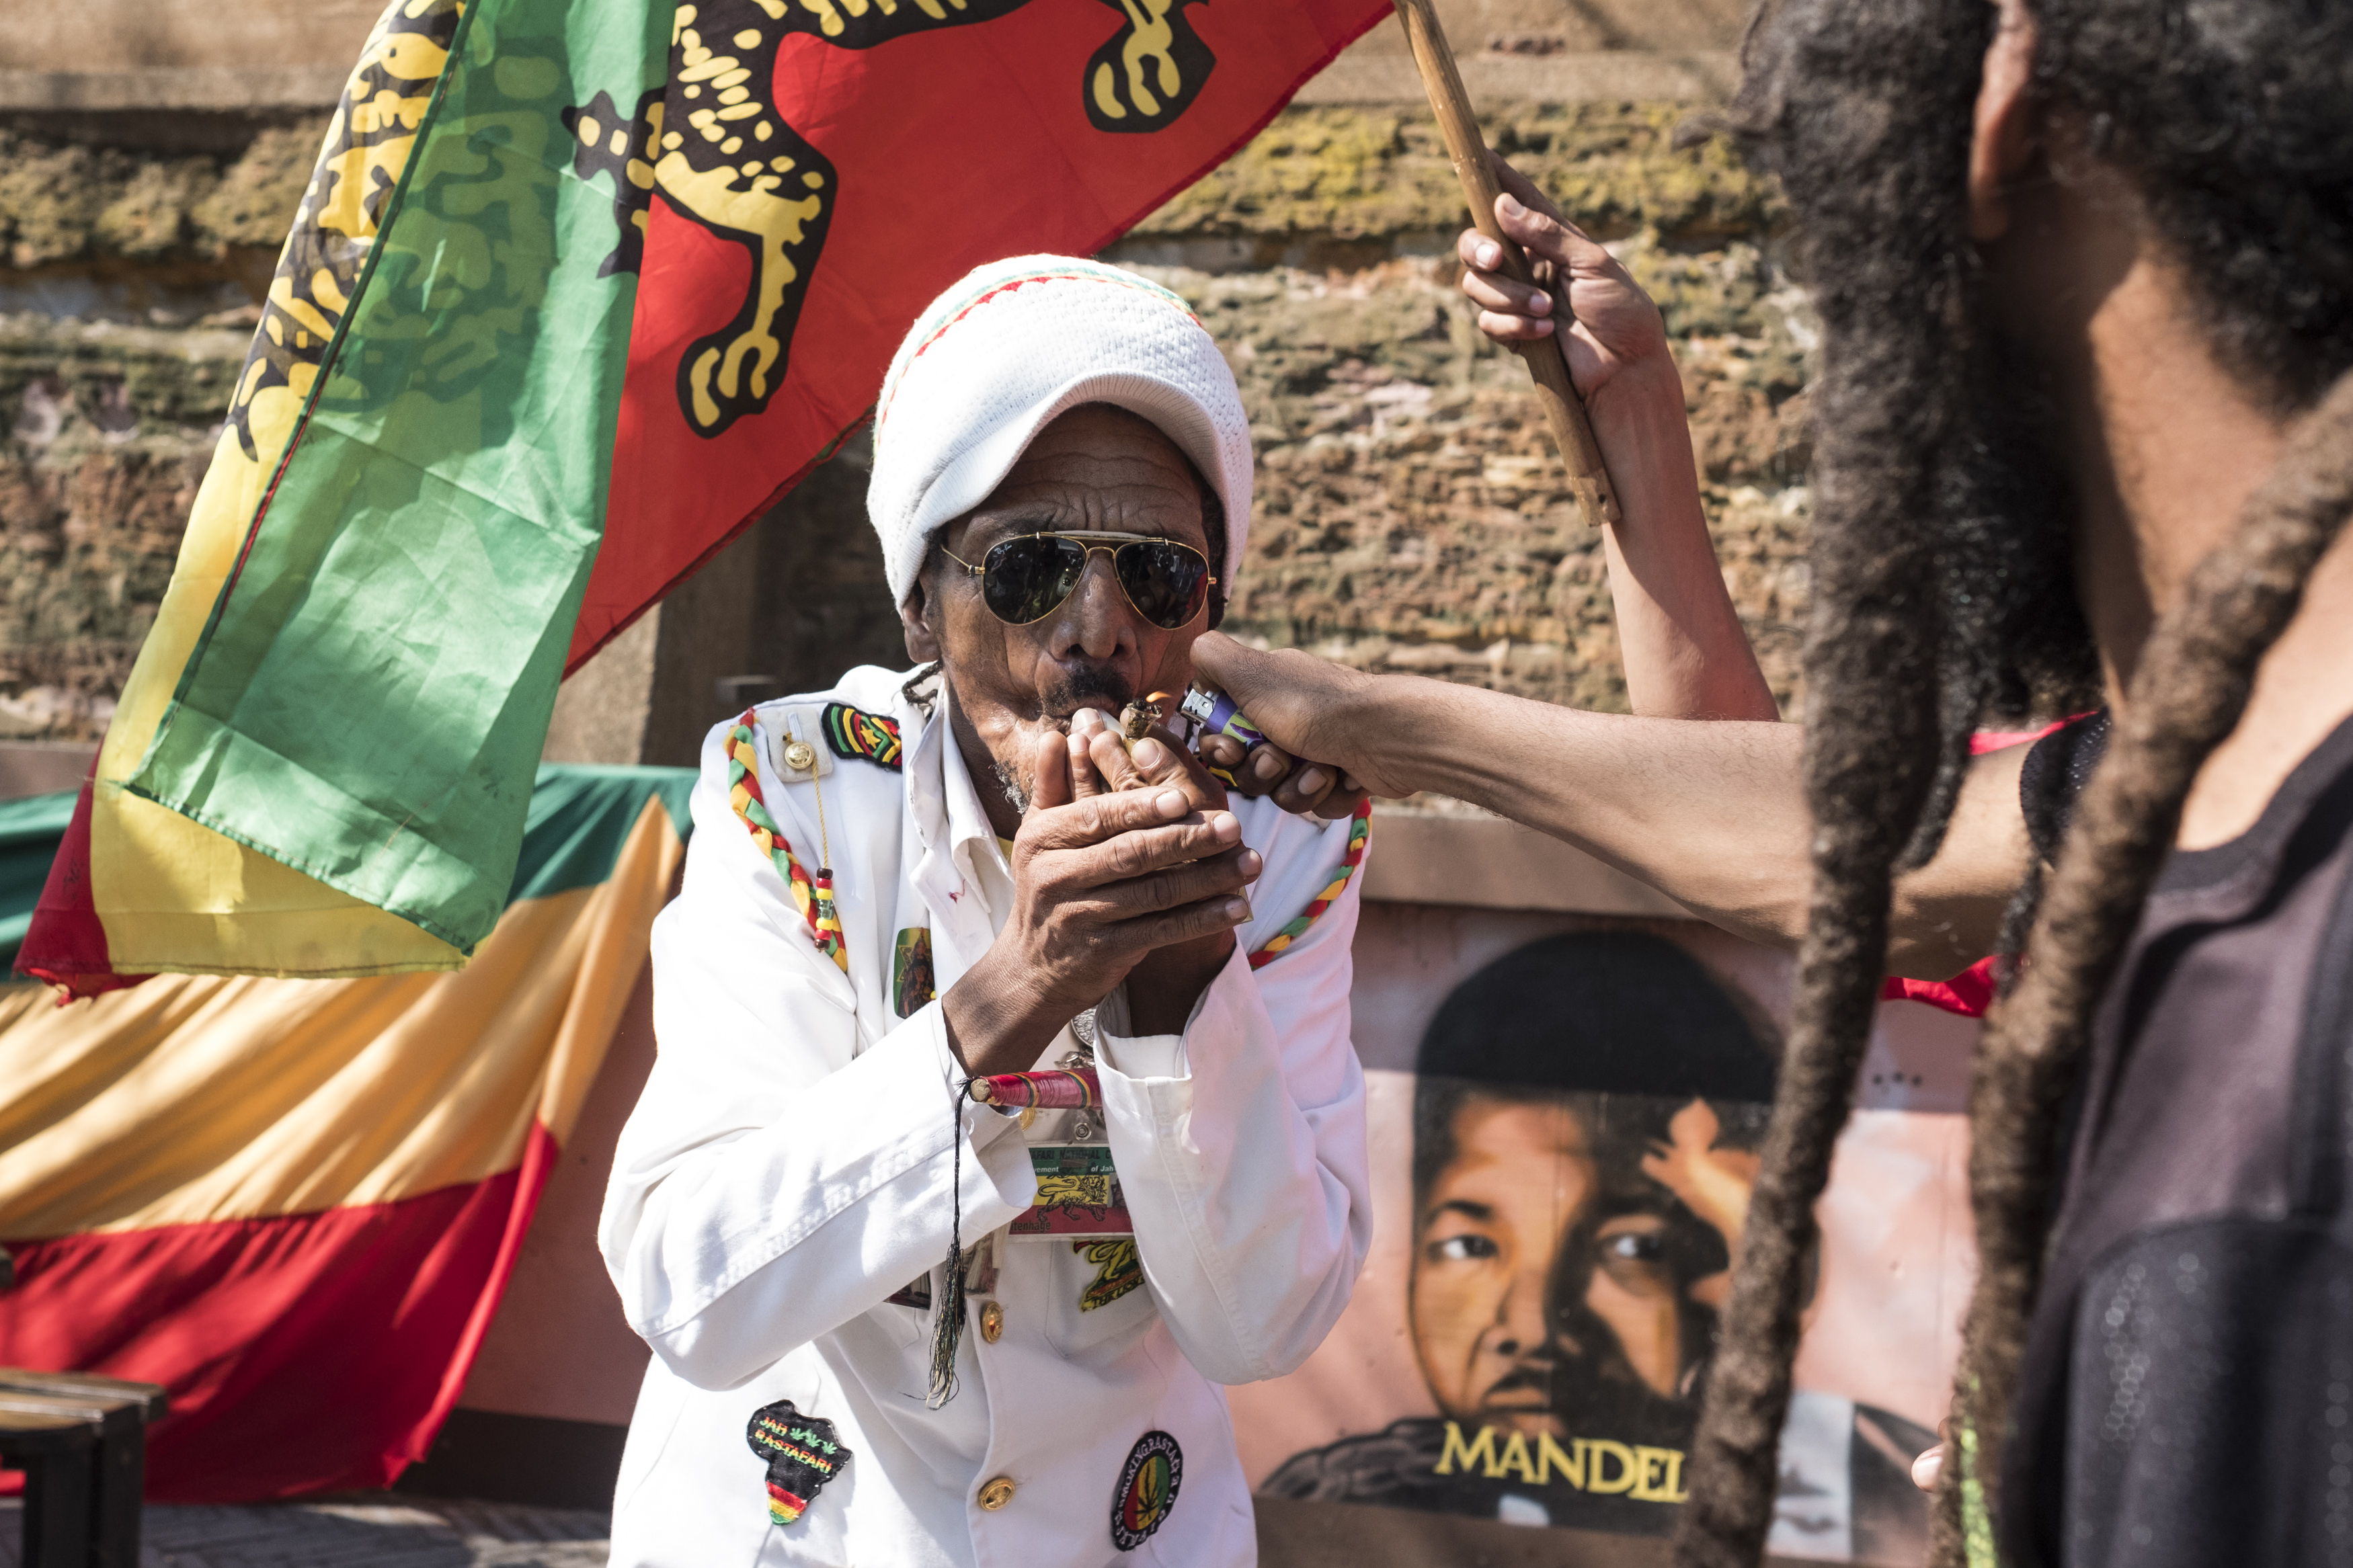 A man smokes marijuana outside the Constitutional Court in Johannesburg on Sept. 18, 2018. (Wikus De Wet—AFP/Getty Images)